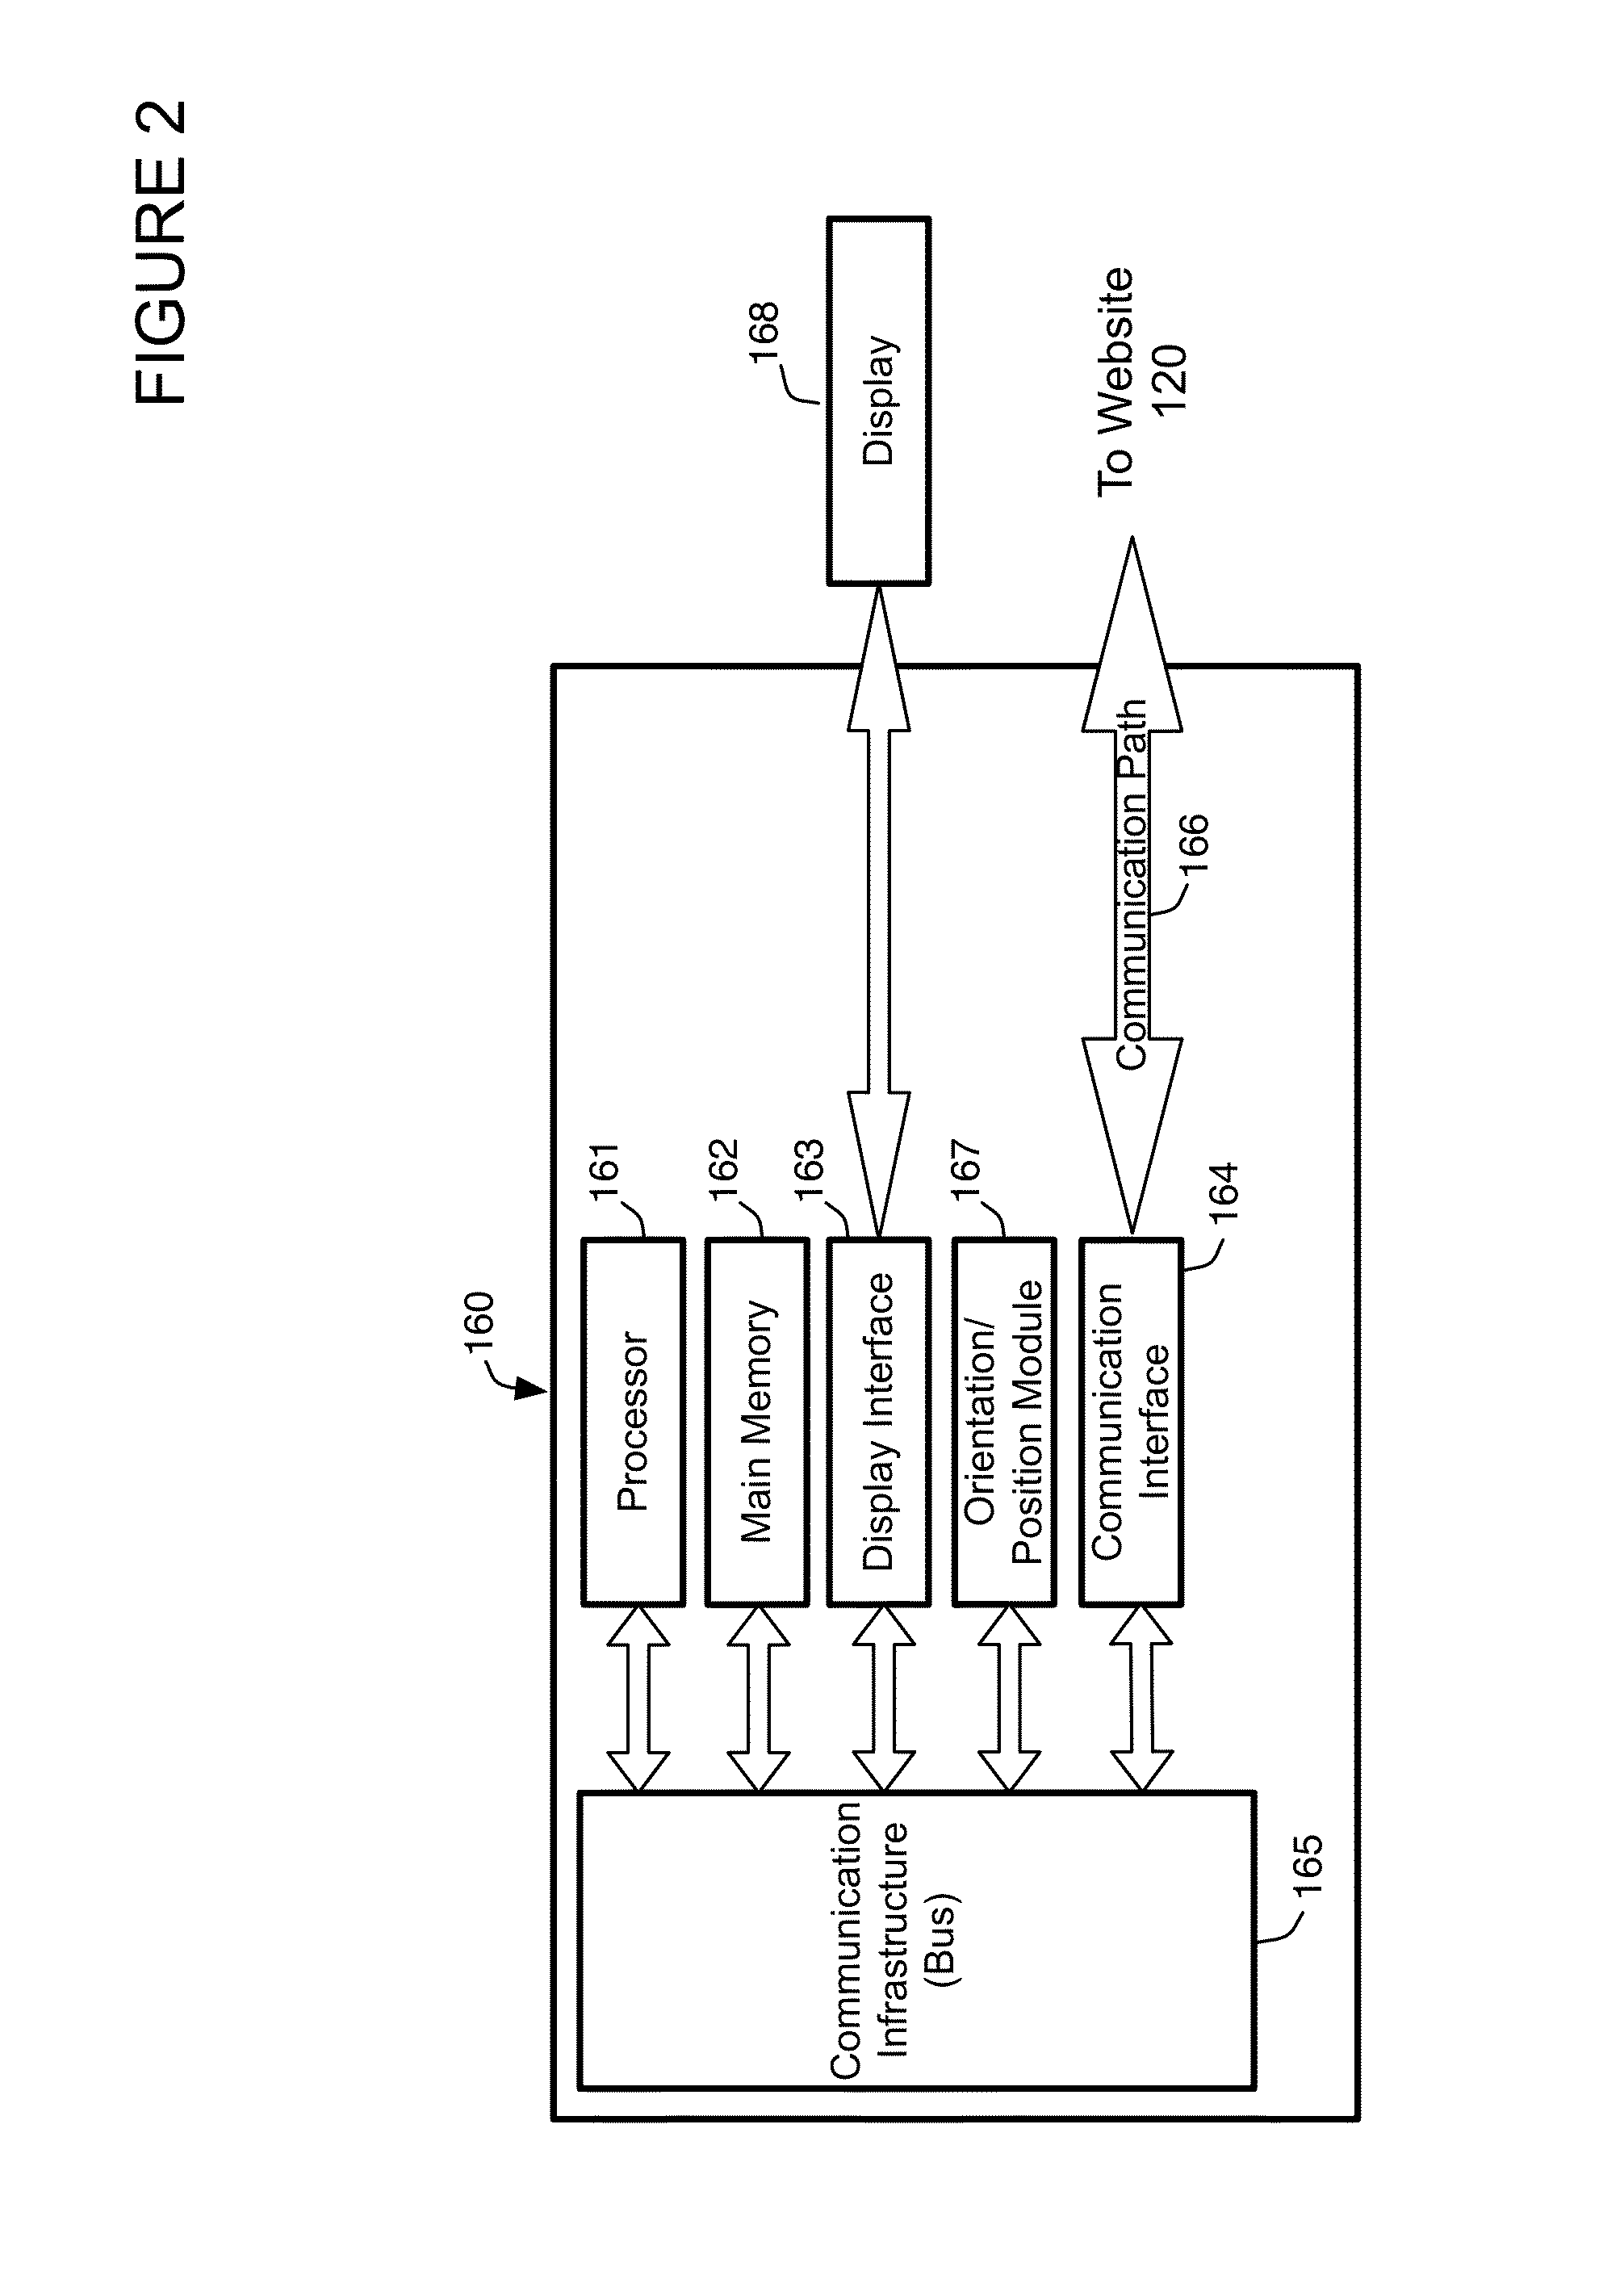 Collaborative first order logic system with dynamic ontology